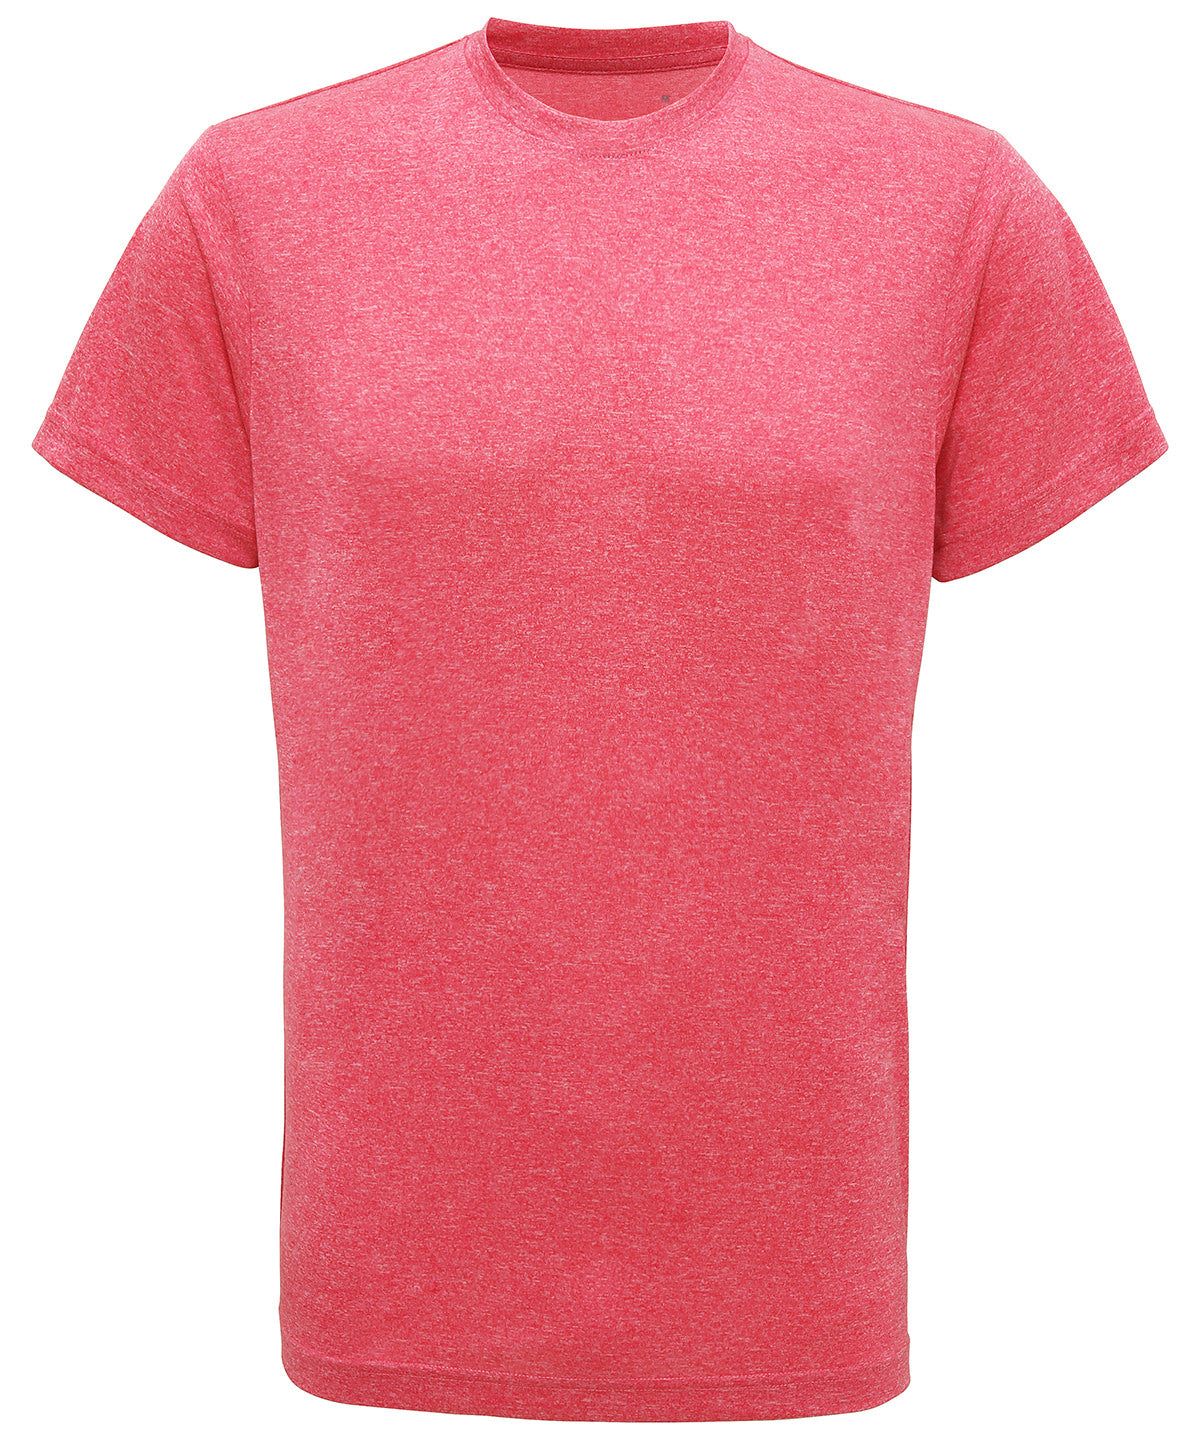 Pink Melange - TriDri® performance t-shirt T-Shirts TriDri® Activewear & Performance, Athleisurewear, Back to the Gym, Exclusives, Gymwear, Must Haves, New Colours For 2022, Outdoor Sports, Plus Sizes, Rebrandable, Sports & Leisure, T-Shirts & Vests, Team Sportswear, UPF Protection Schoolwear Centres